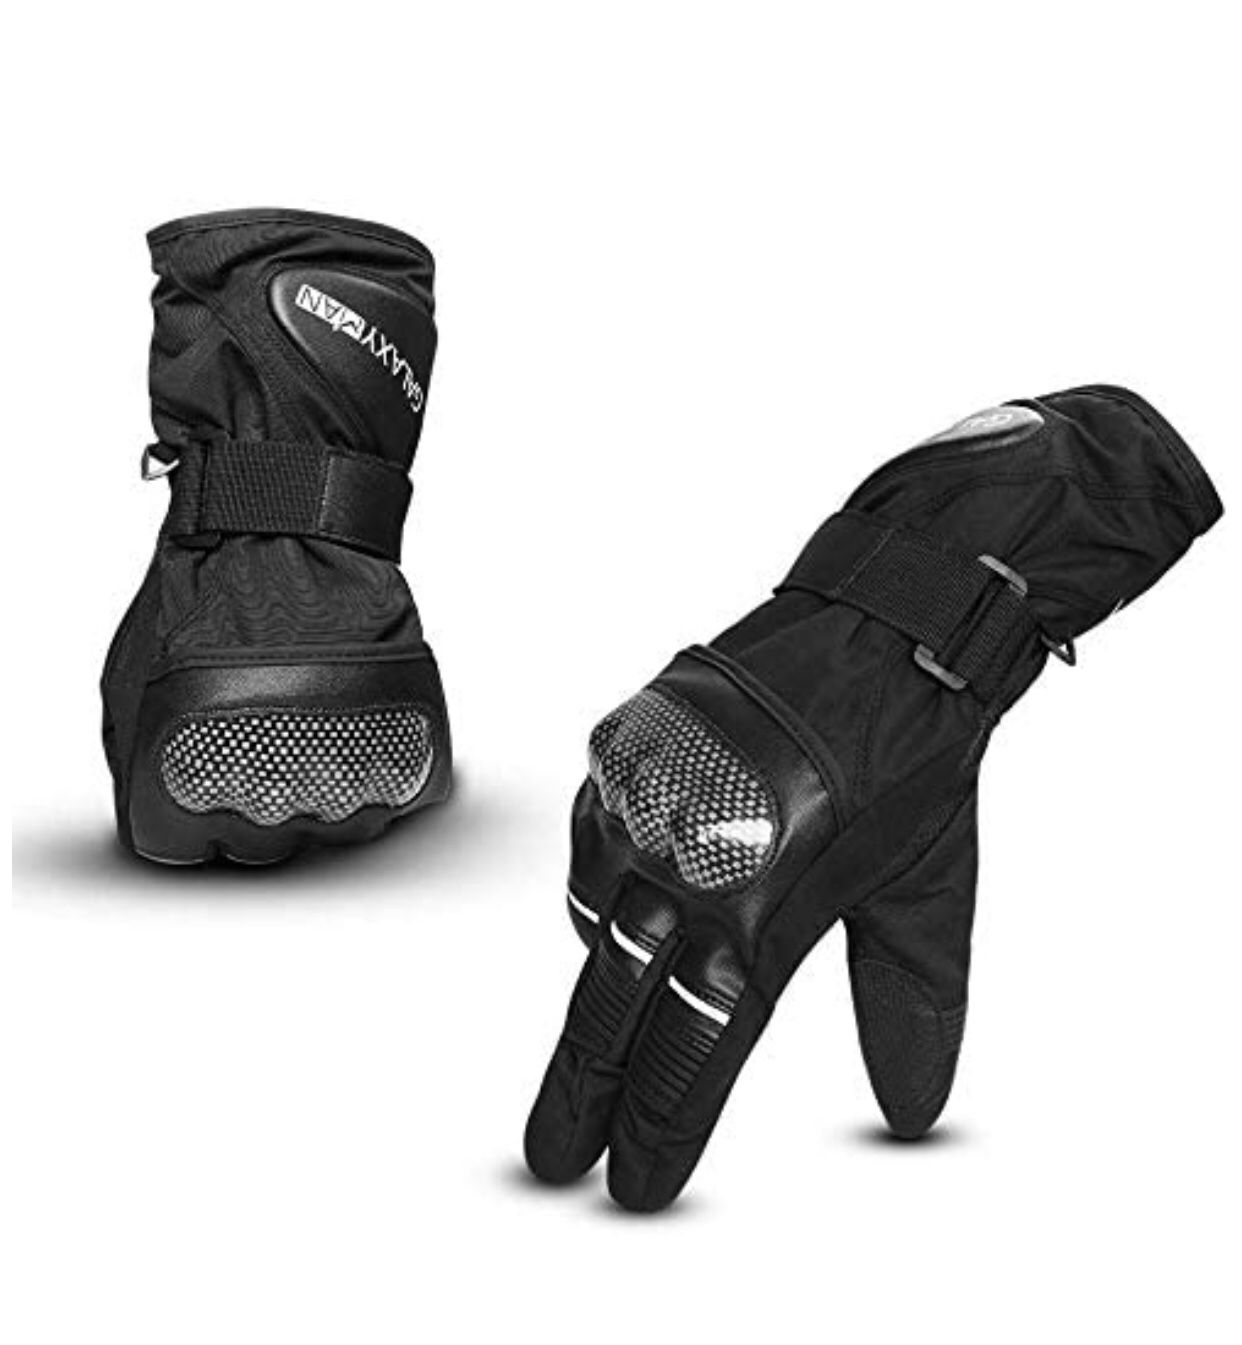 Winter Motorcycle Gloves Touchscreen Warm Waterproof Gloves with Hard Knuckle Protection for Motorbike Riding ATV Scooter Snowmobile Outdoor (L)